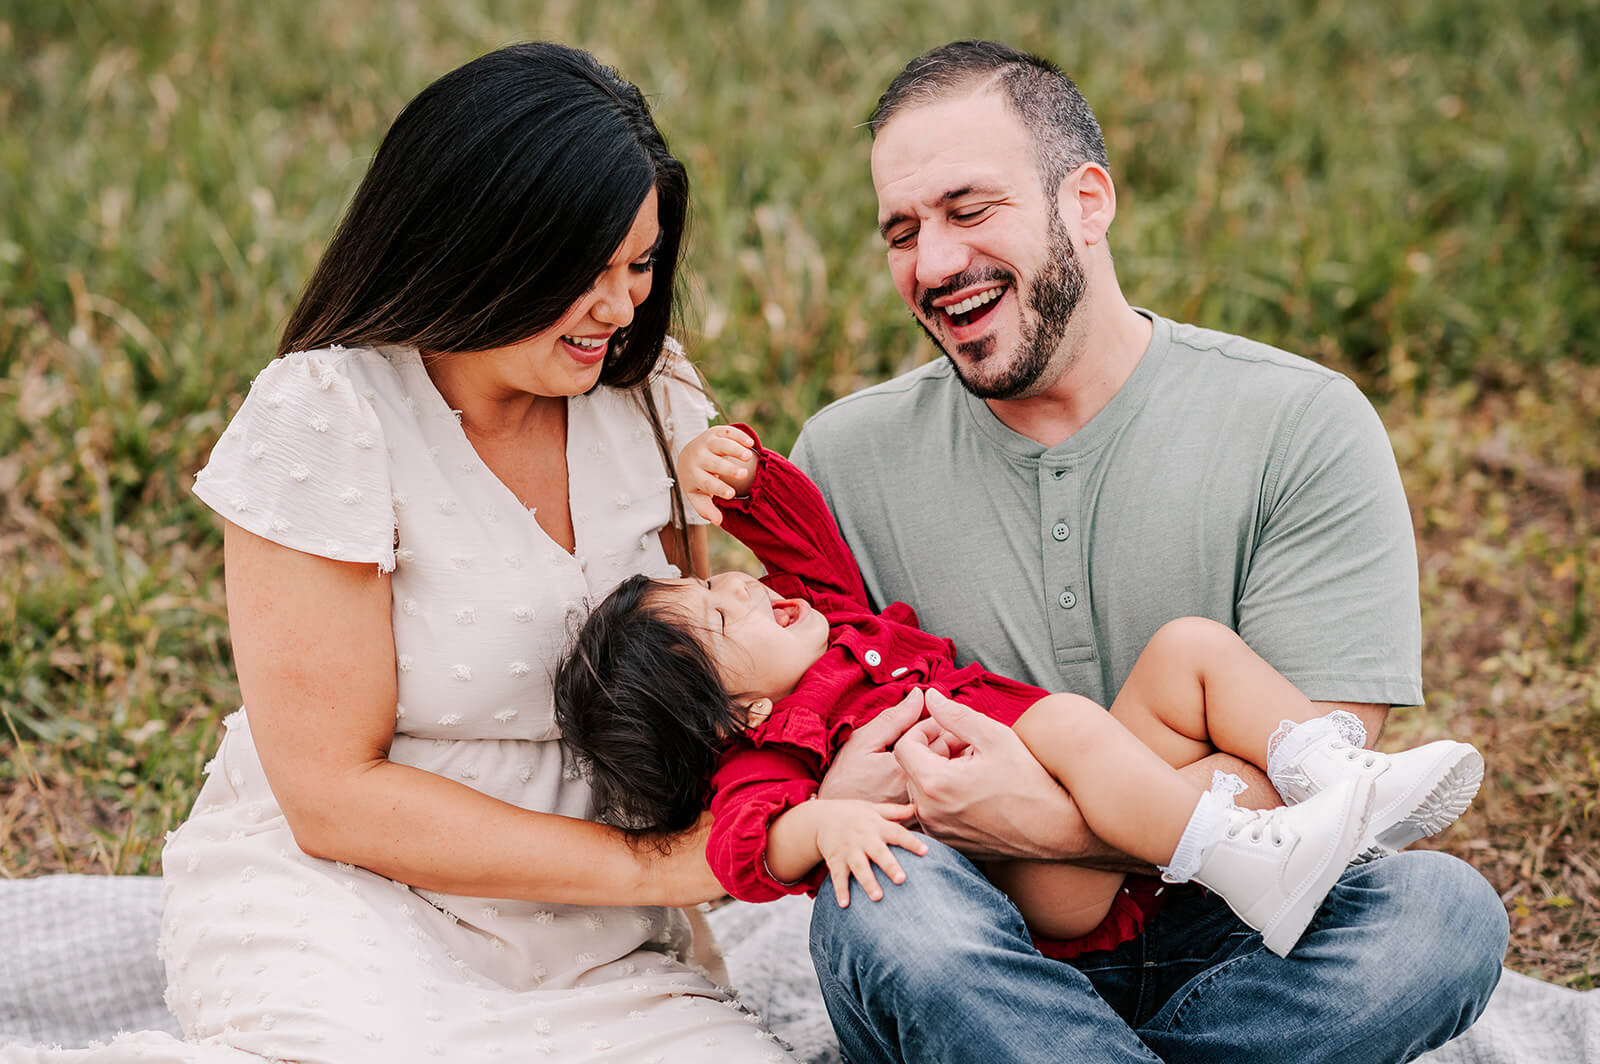 A mom and dad play and laugh with their toddler daughter in dad's lap while sitting on a blanket in a park after using wake forest obgyn clemmons